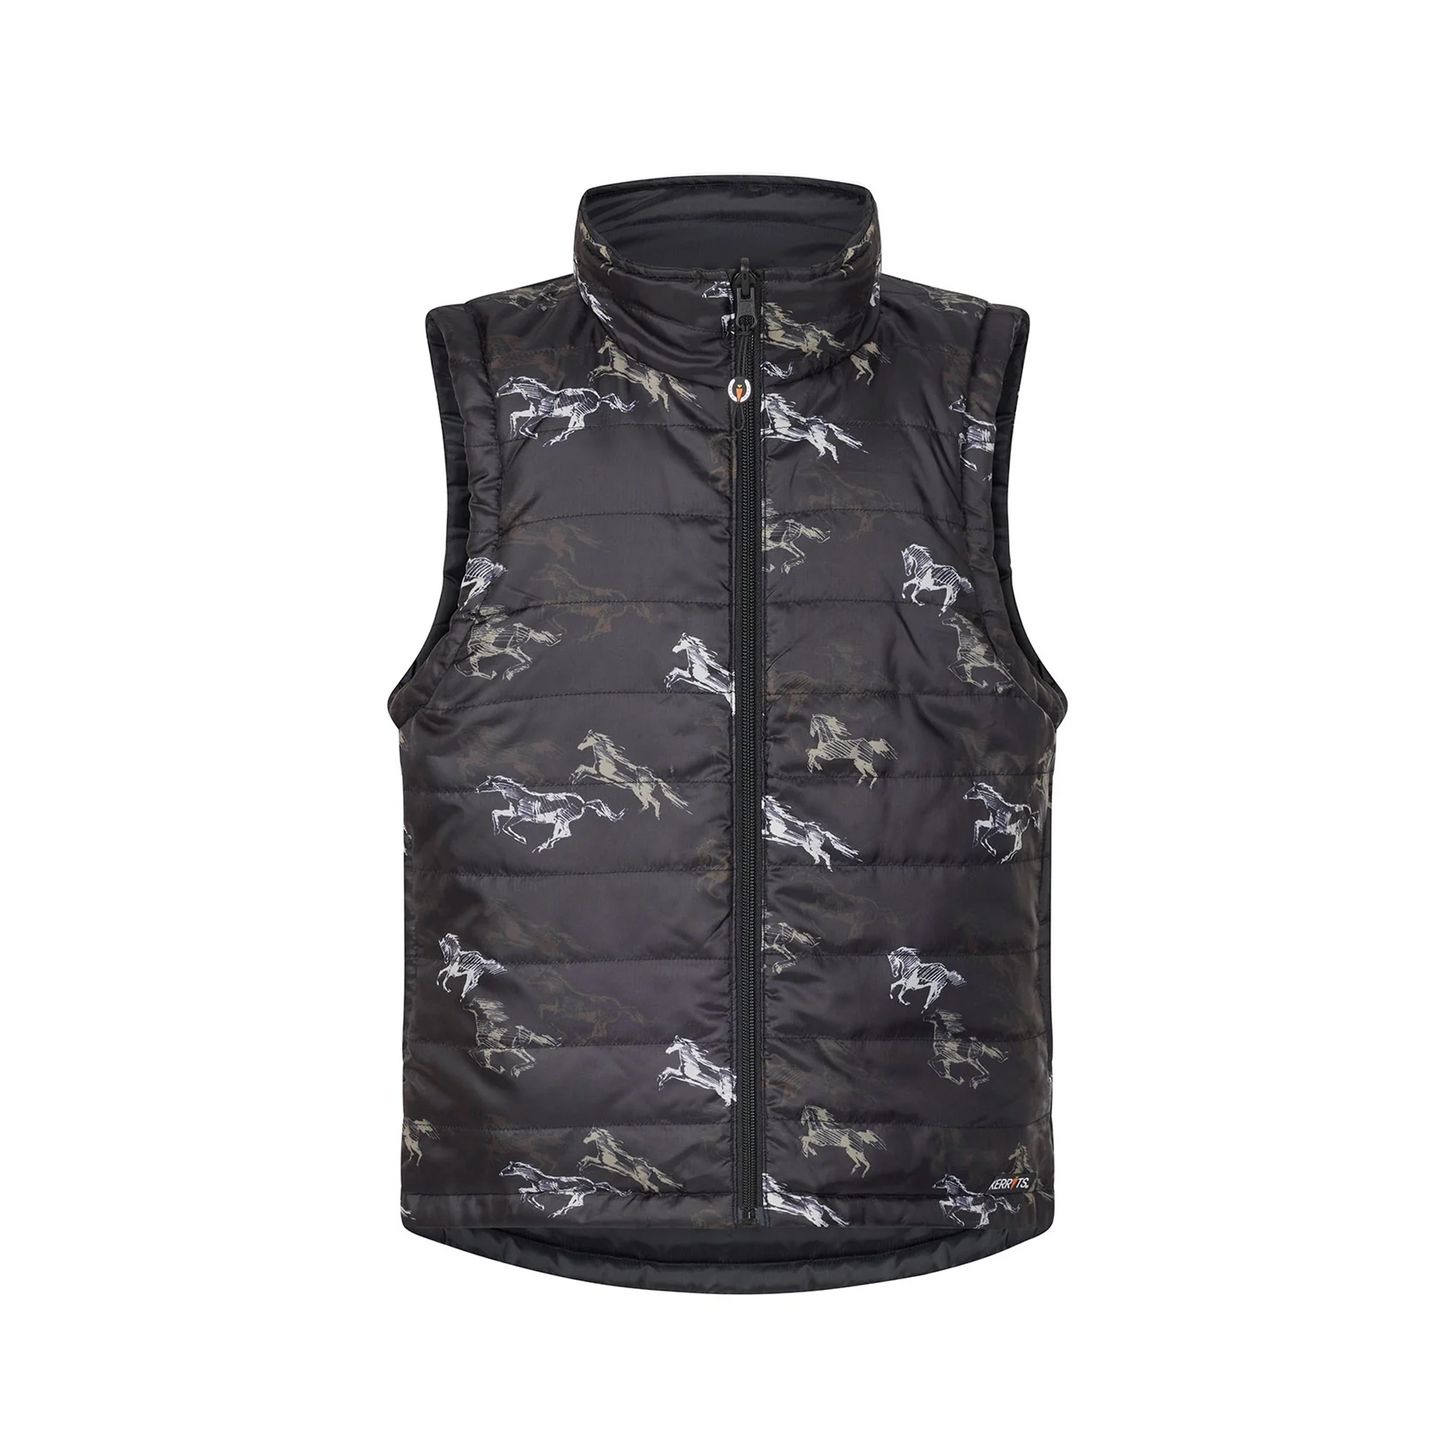 Kids Pony Tracks Reversible Quilted Riding Vest